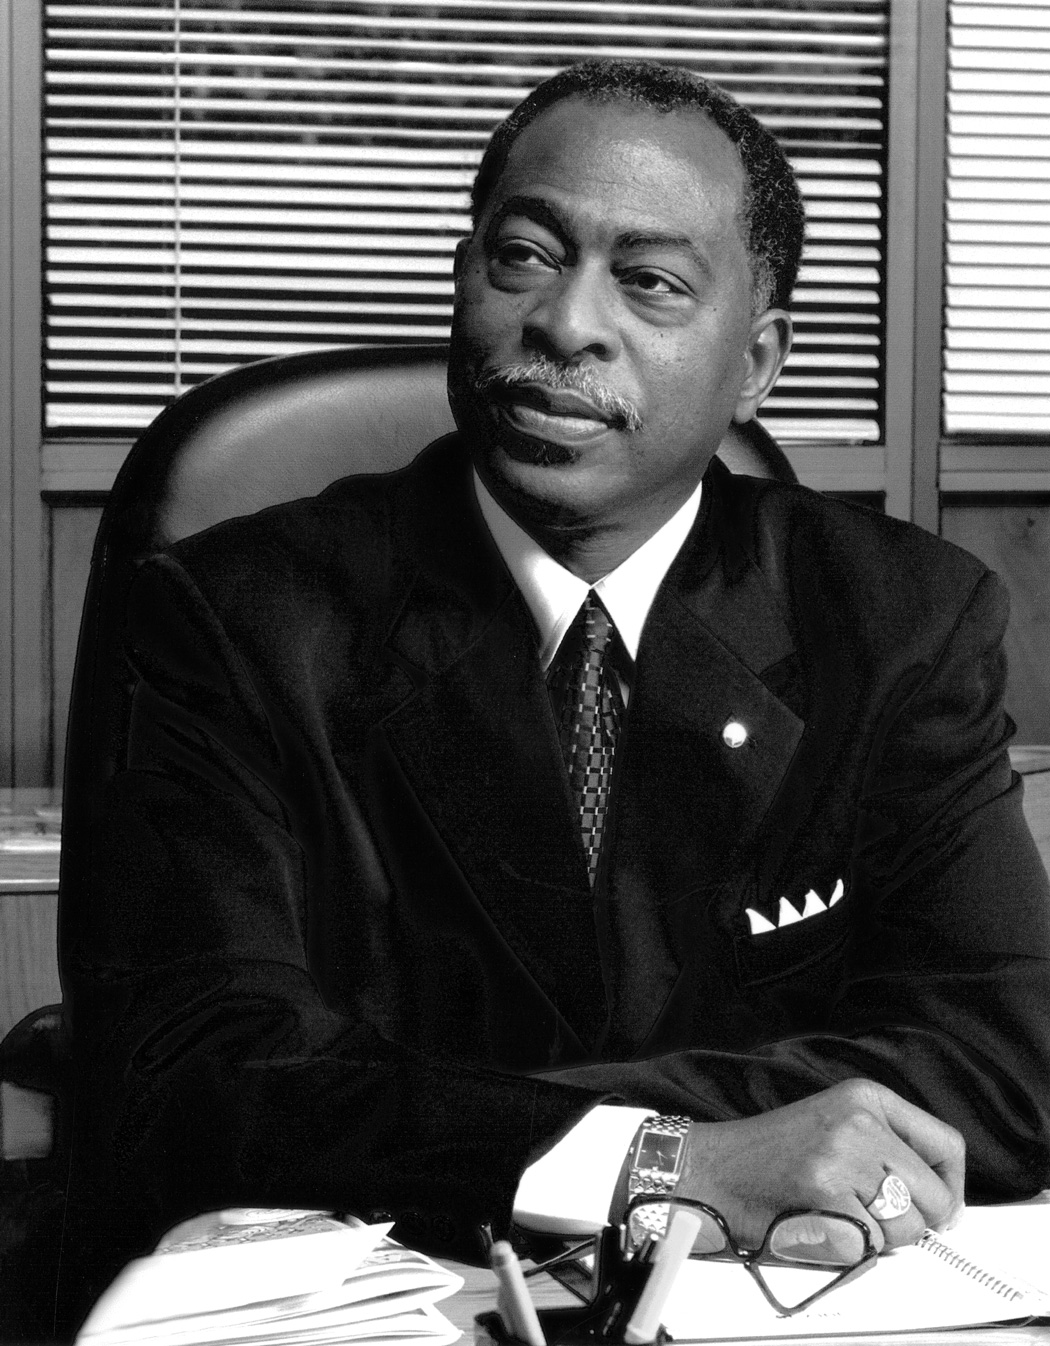 James E. Lyons Sr. became president of CSU Dominguez Hills on July 1, 1999. Previously, Lyons served as president of Bowie State University and Jackson State University. A Peace Corps veteran, he received his doctorate from the University of Connecticut. During his administration, Lyons focused on expanding the physical campus, accreditation, and the concept of "communiversity," or the connection between the university and the community